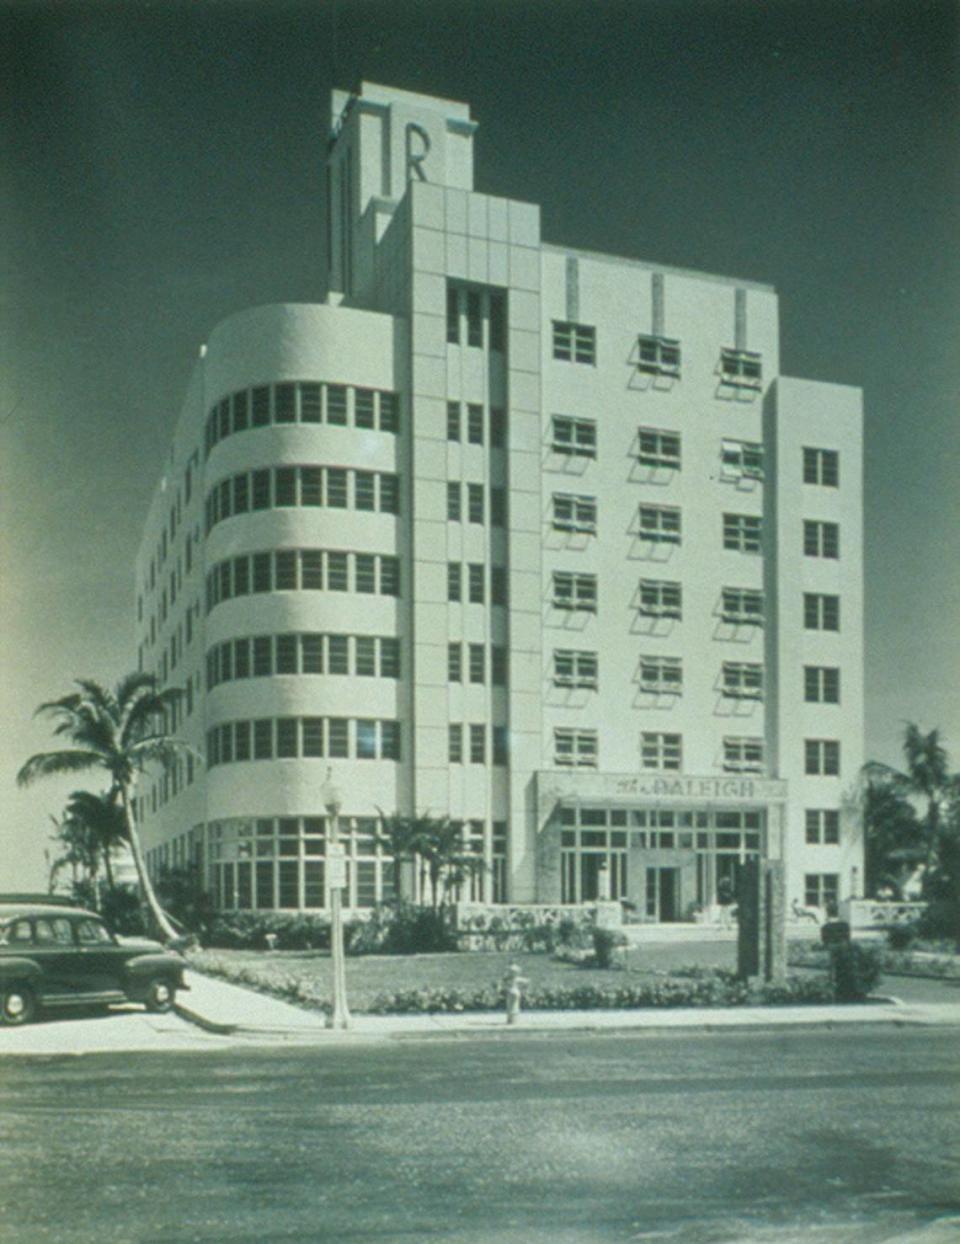 Miami Beach’s Raleigh Hotel was designed by L. Murray Dixon. No year is known for this photo, on display at the Bass Museum in a collection of photos of Dixon’s works.